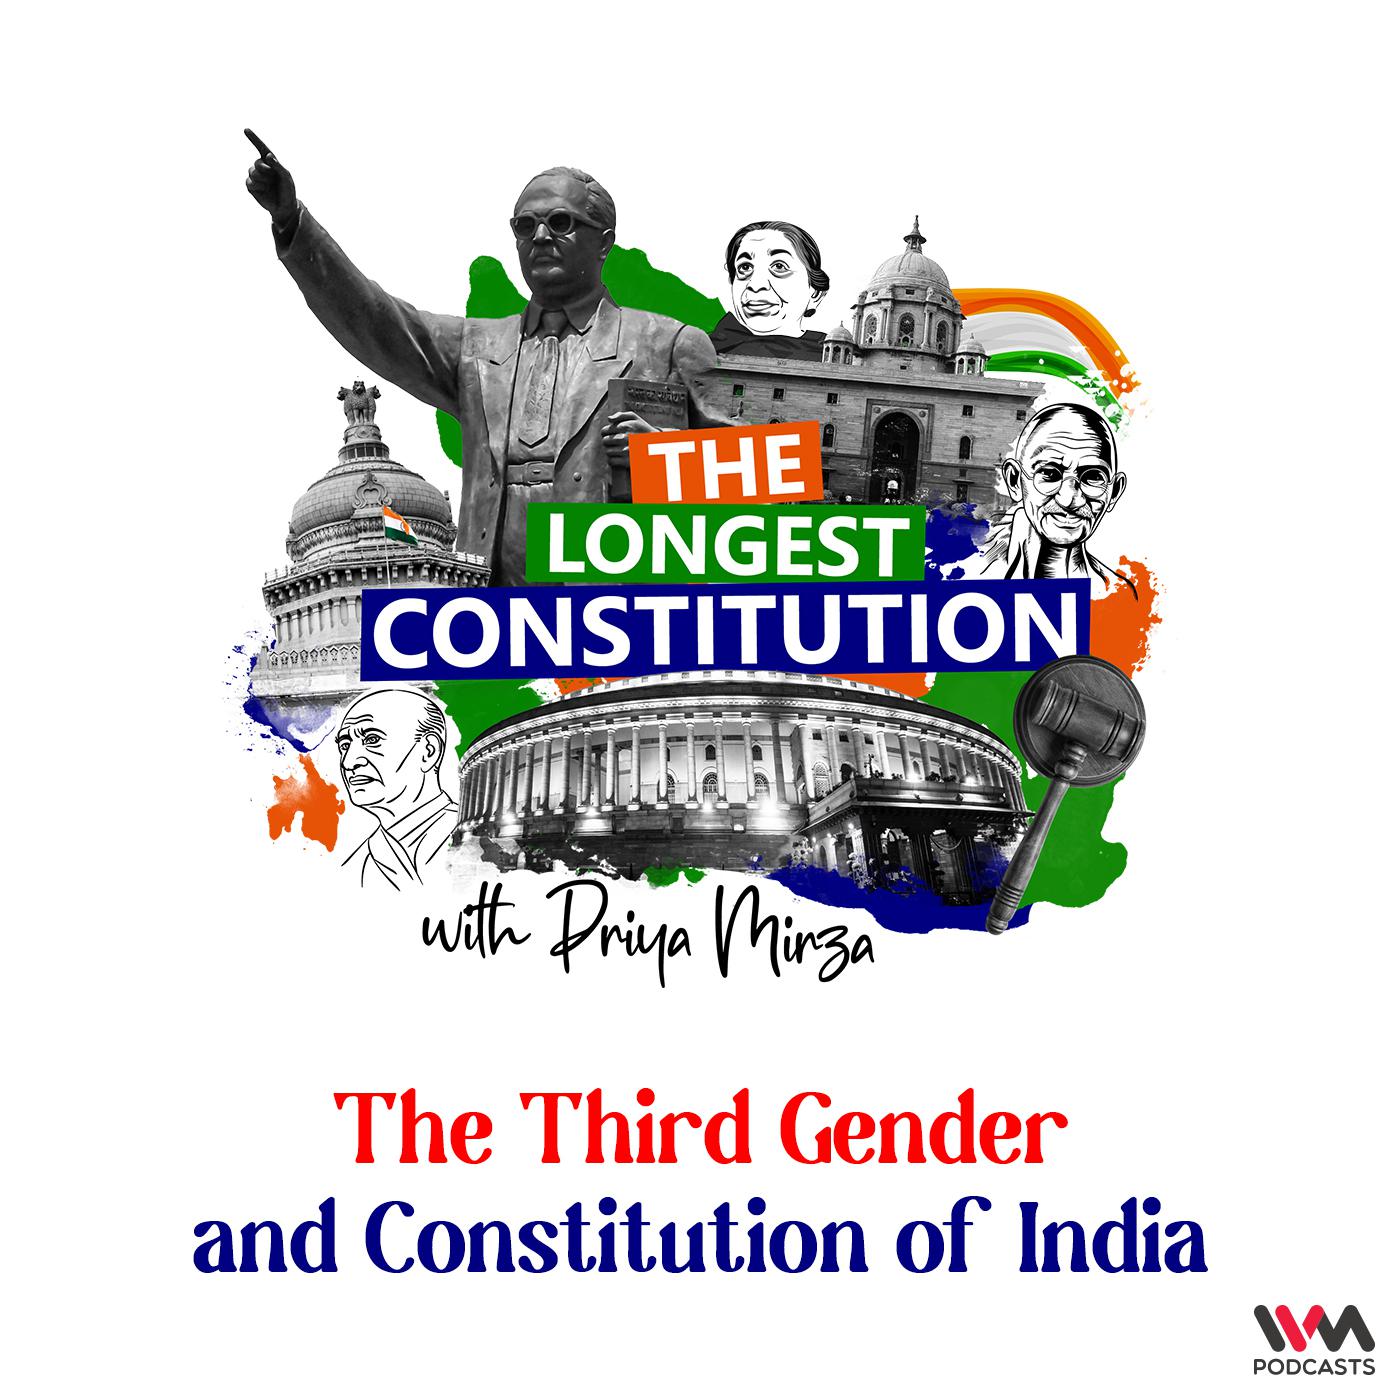 The Third Gender and Constitution of India